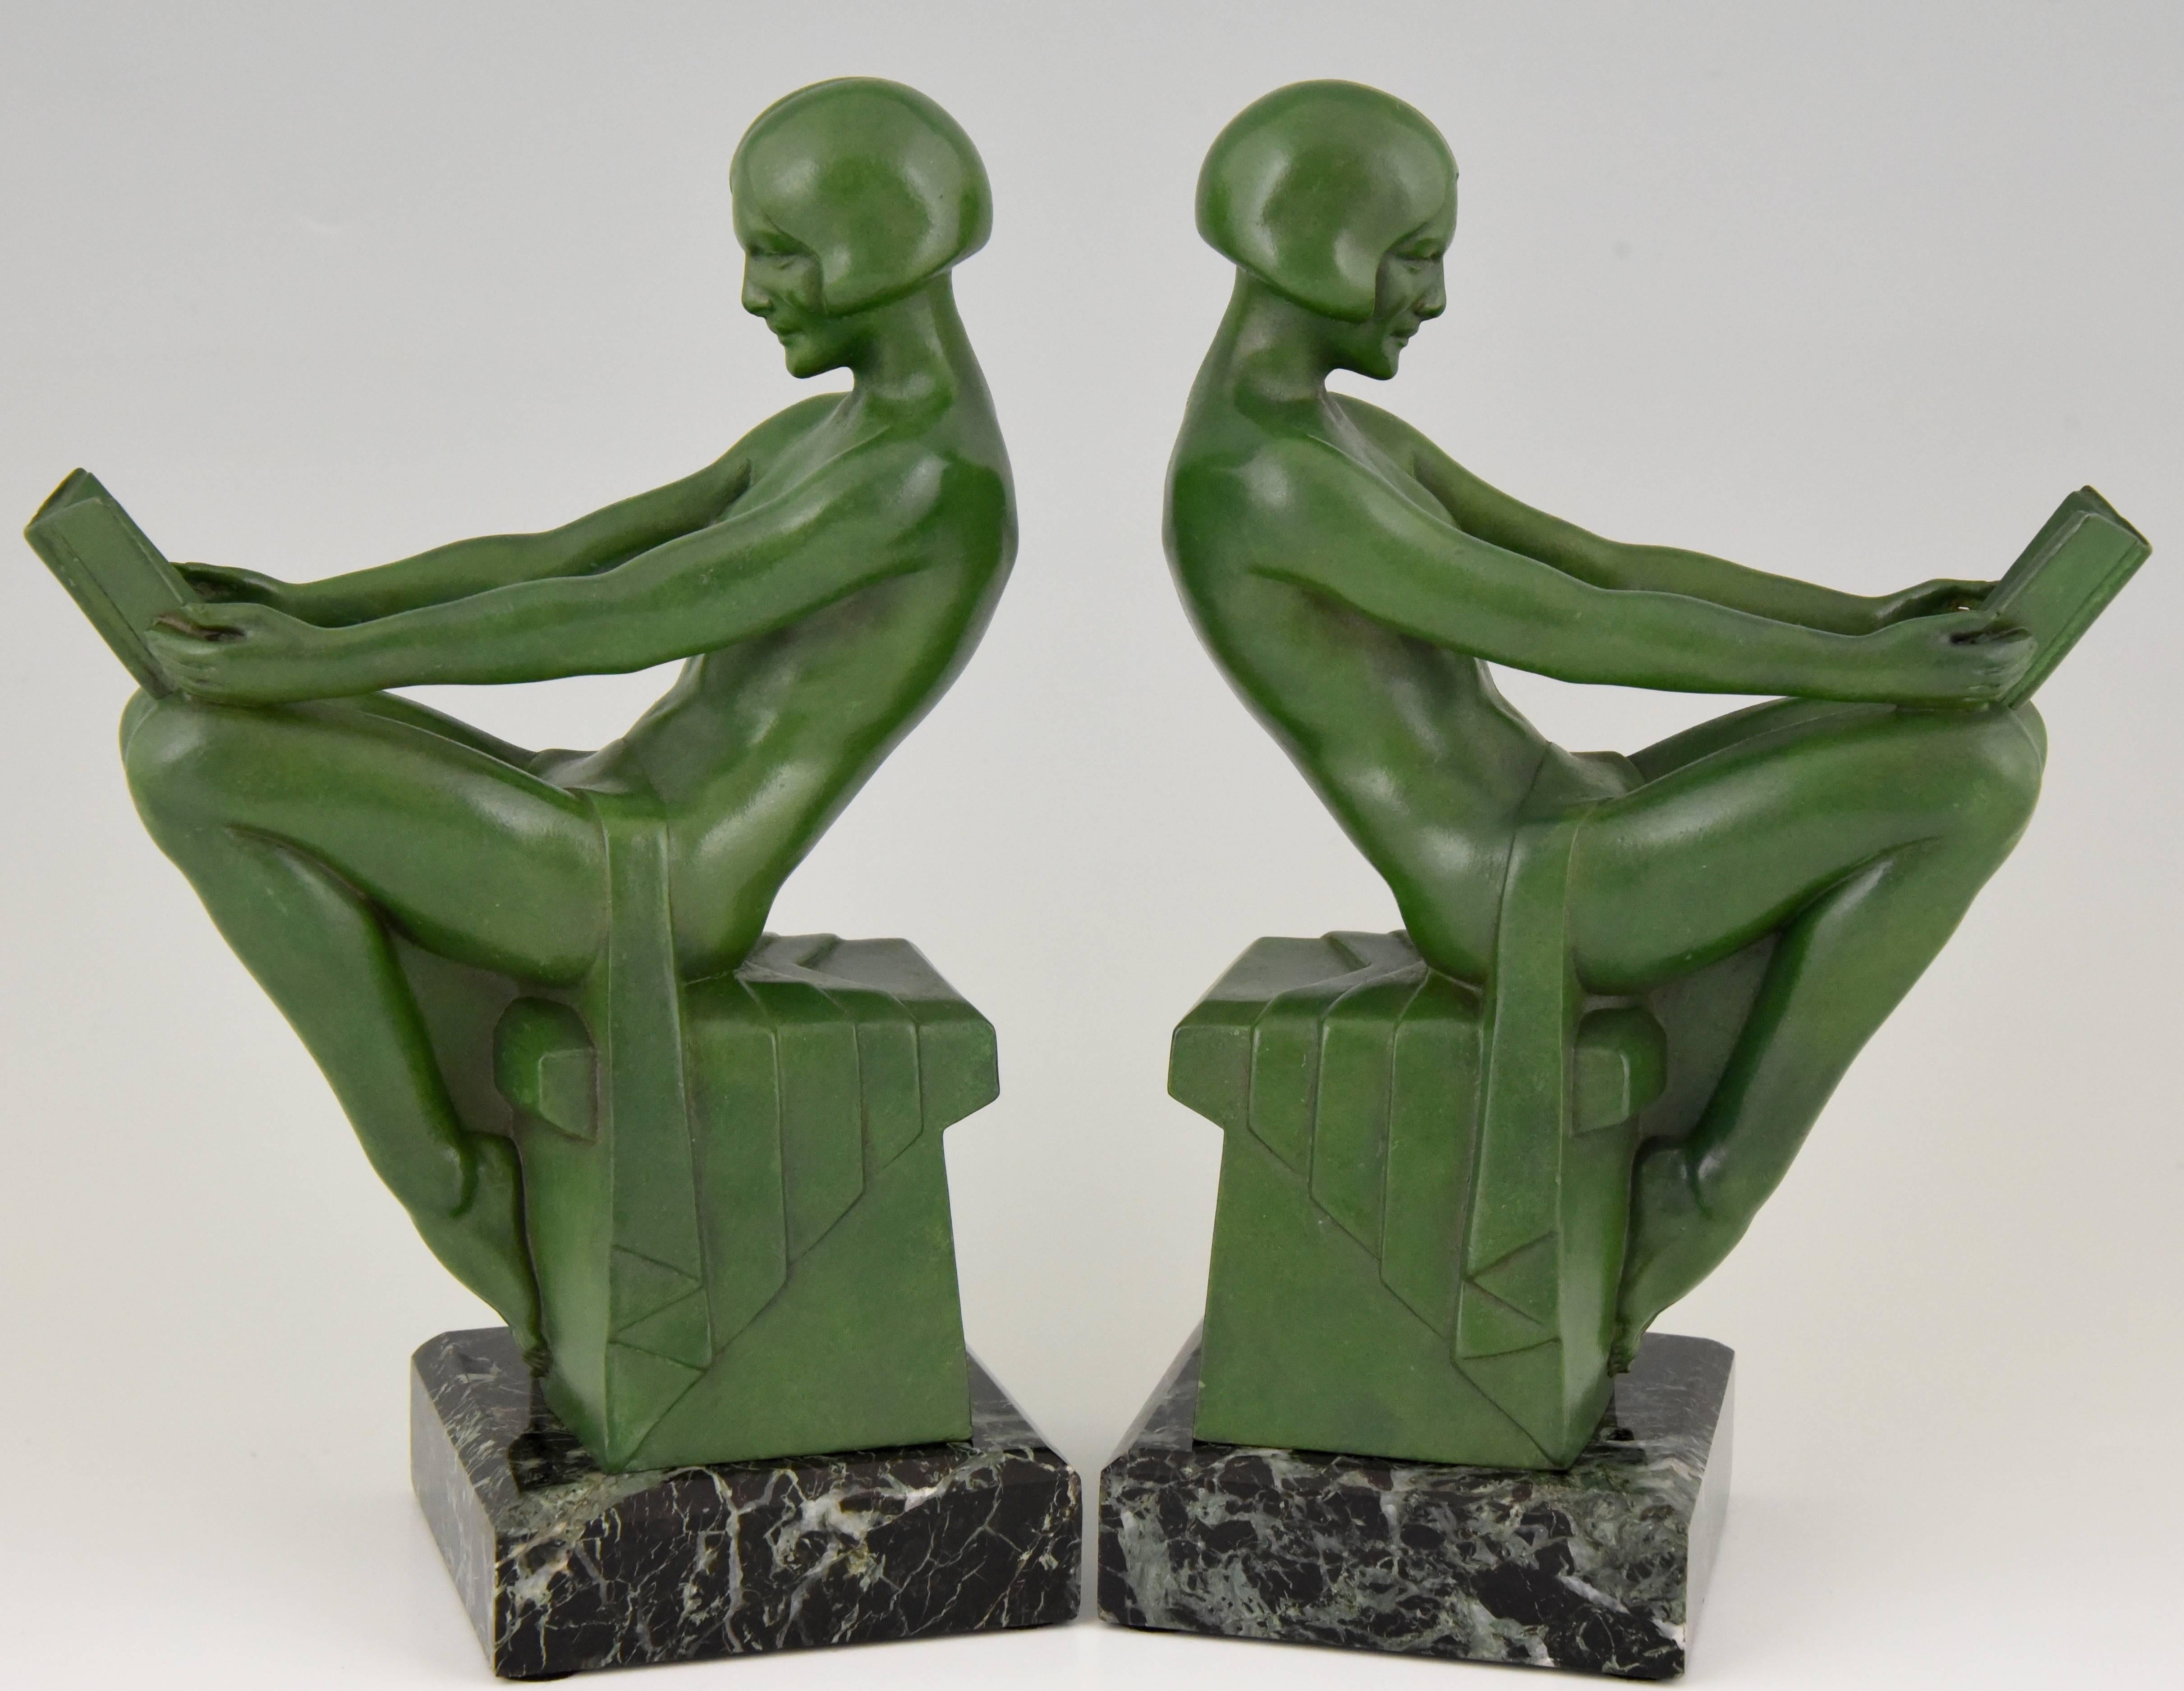 Very fine pair of Art Deco figural bookends modelled as reading nudes by the French artist Max Le Verrier.

Signature/ Marks: M. Le Verrier.
Style: Art Deco.
Date: 1930.
Material: Green patinated metal. Green marble base.
Origin: